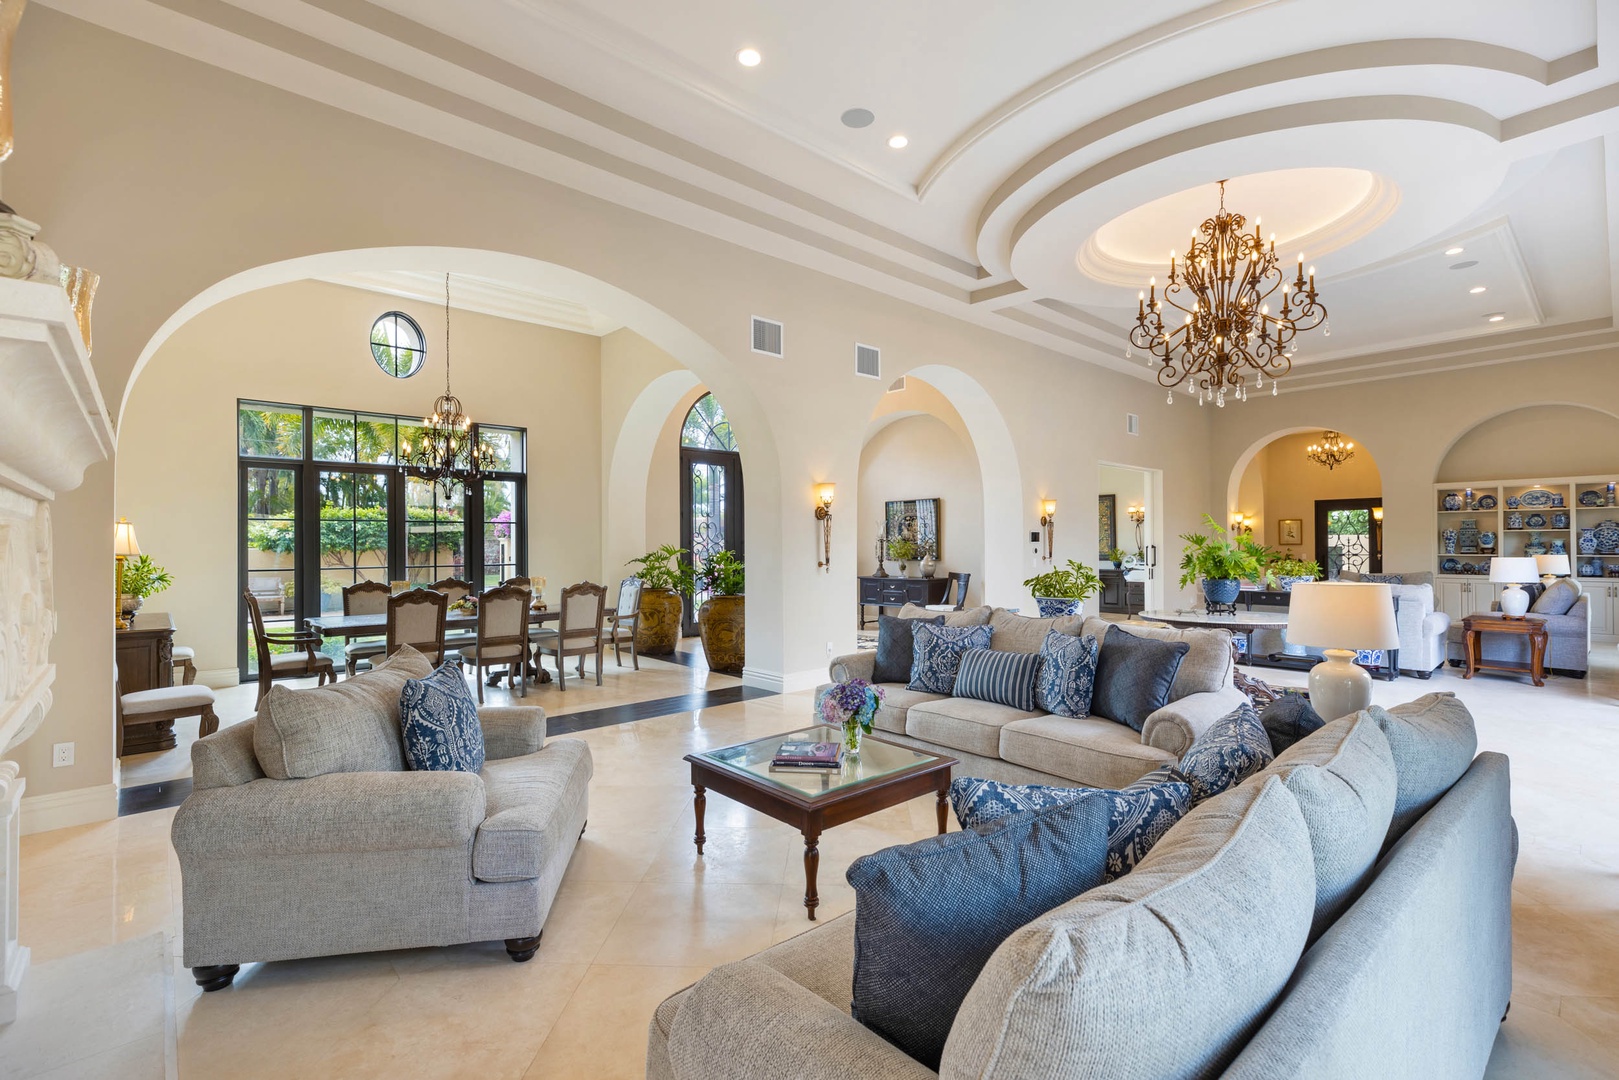 Honolulu Vacation Rentals, Royal Kahala Estate - The spacious open floor plan perfect for entertaining and relaxing.